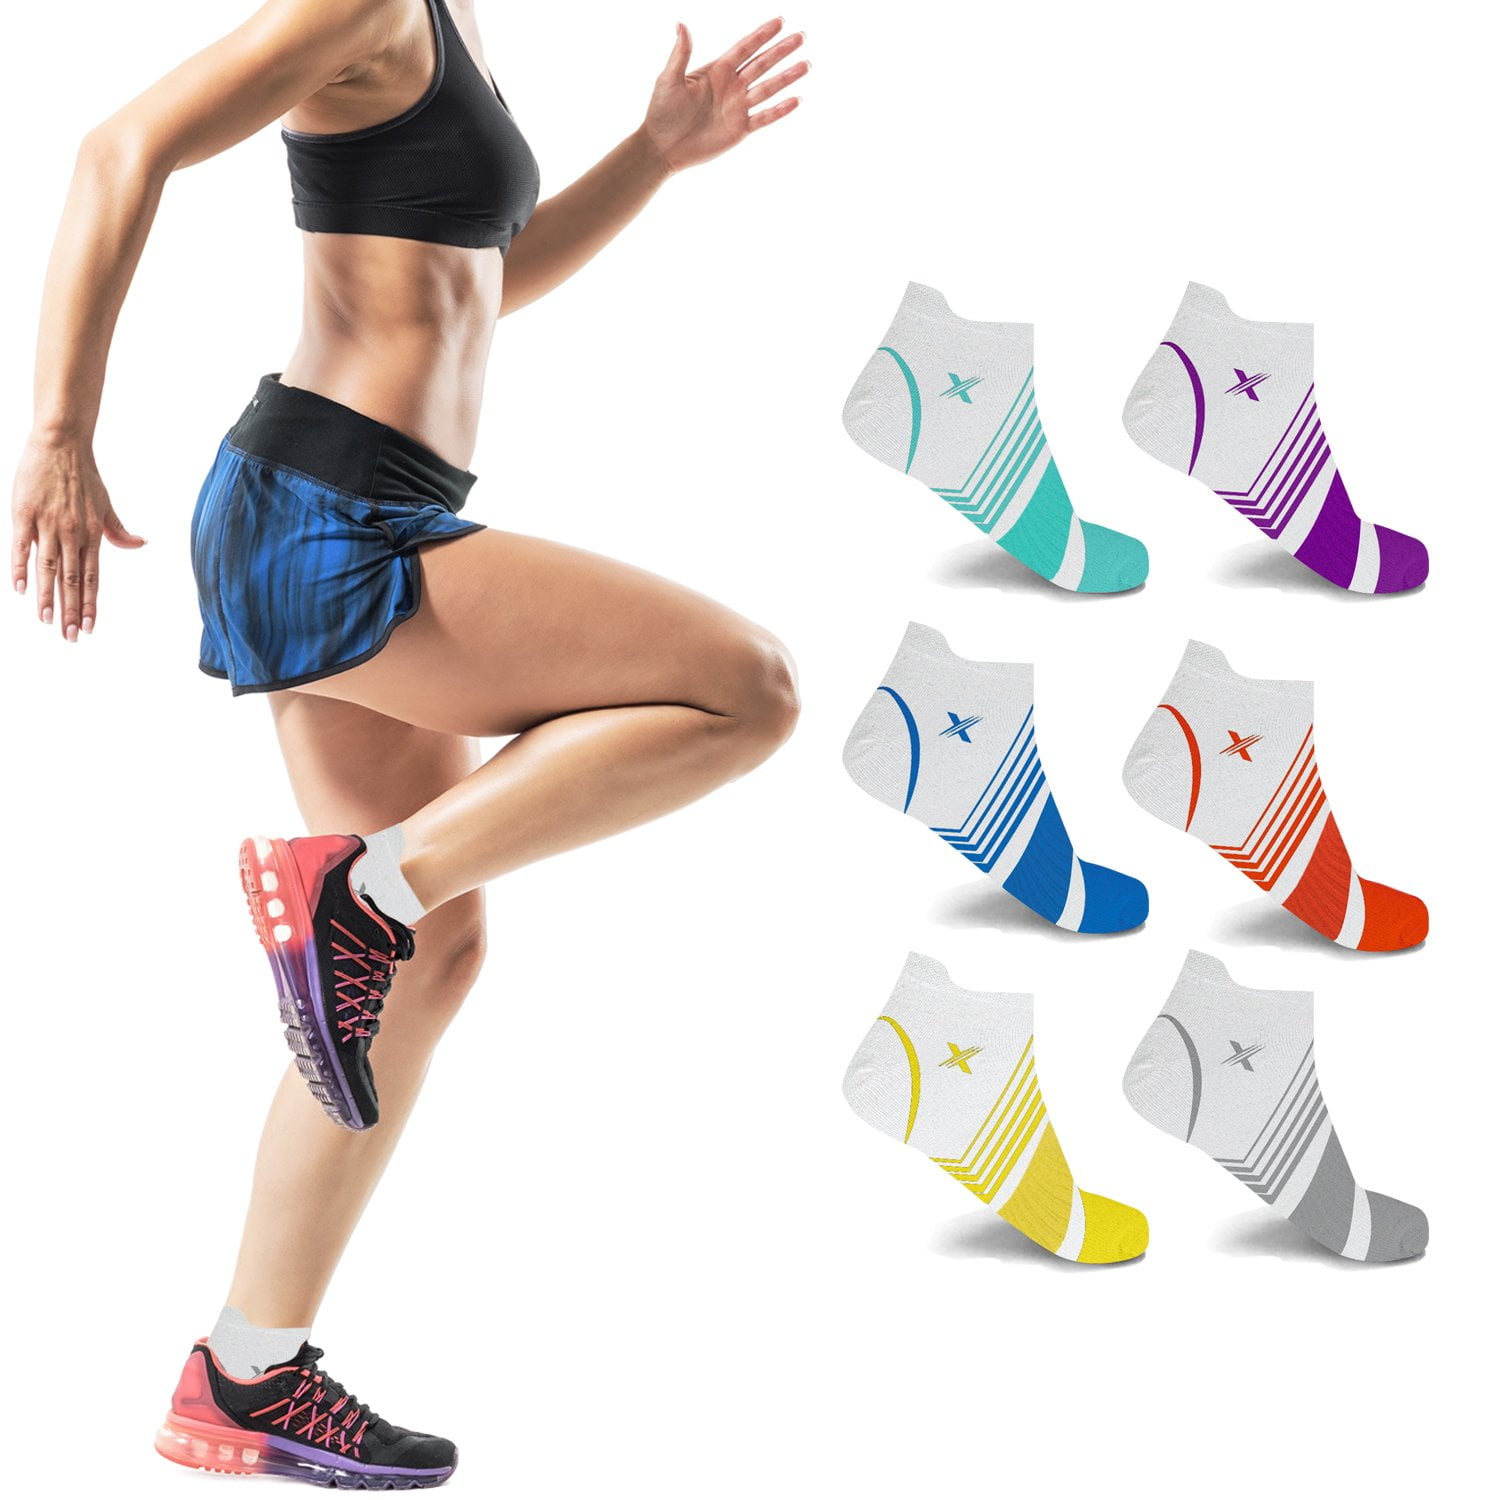 Compression Socks for Running Medical Blood Circulation 3 Pairs 20-25mmHg Compression Socks for Sports Pregnancy J TOHLO Compression Socks Travel Women Cushioned and Graduated Compression Men Flight Exercise Muscle Recovery Nurses 